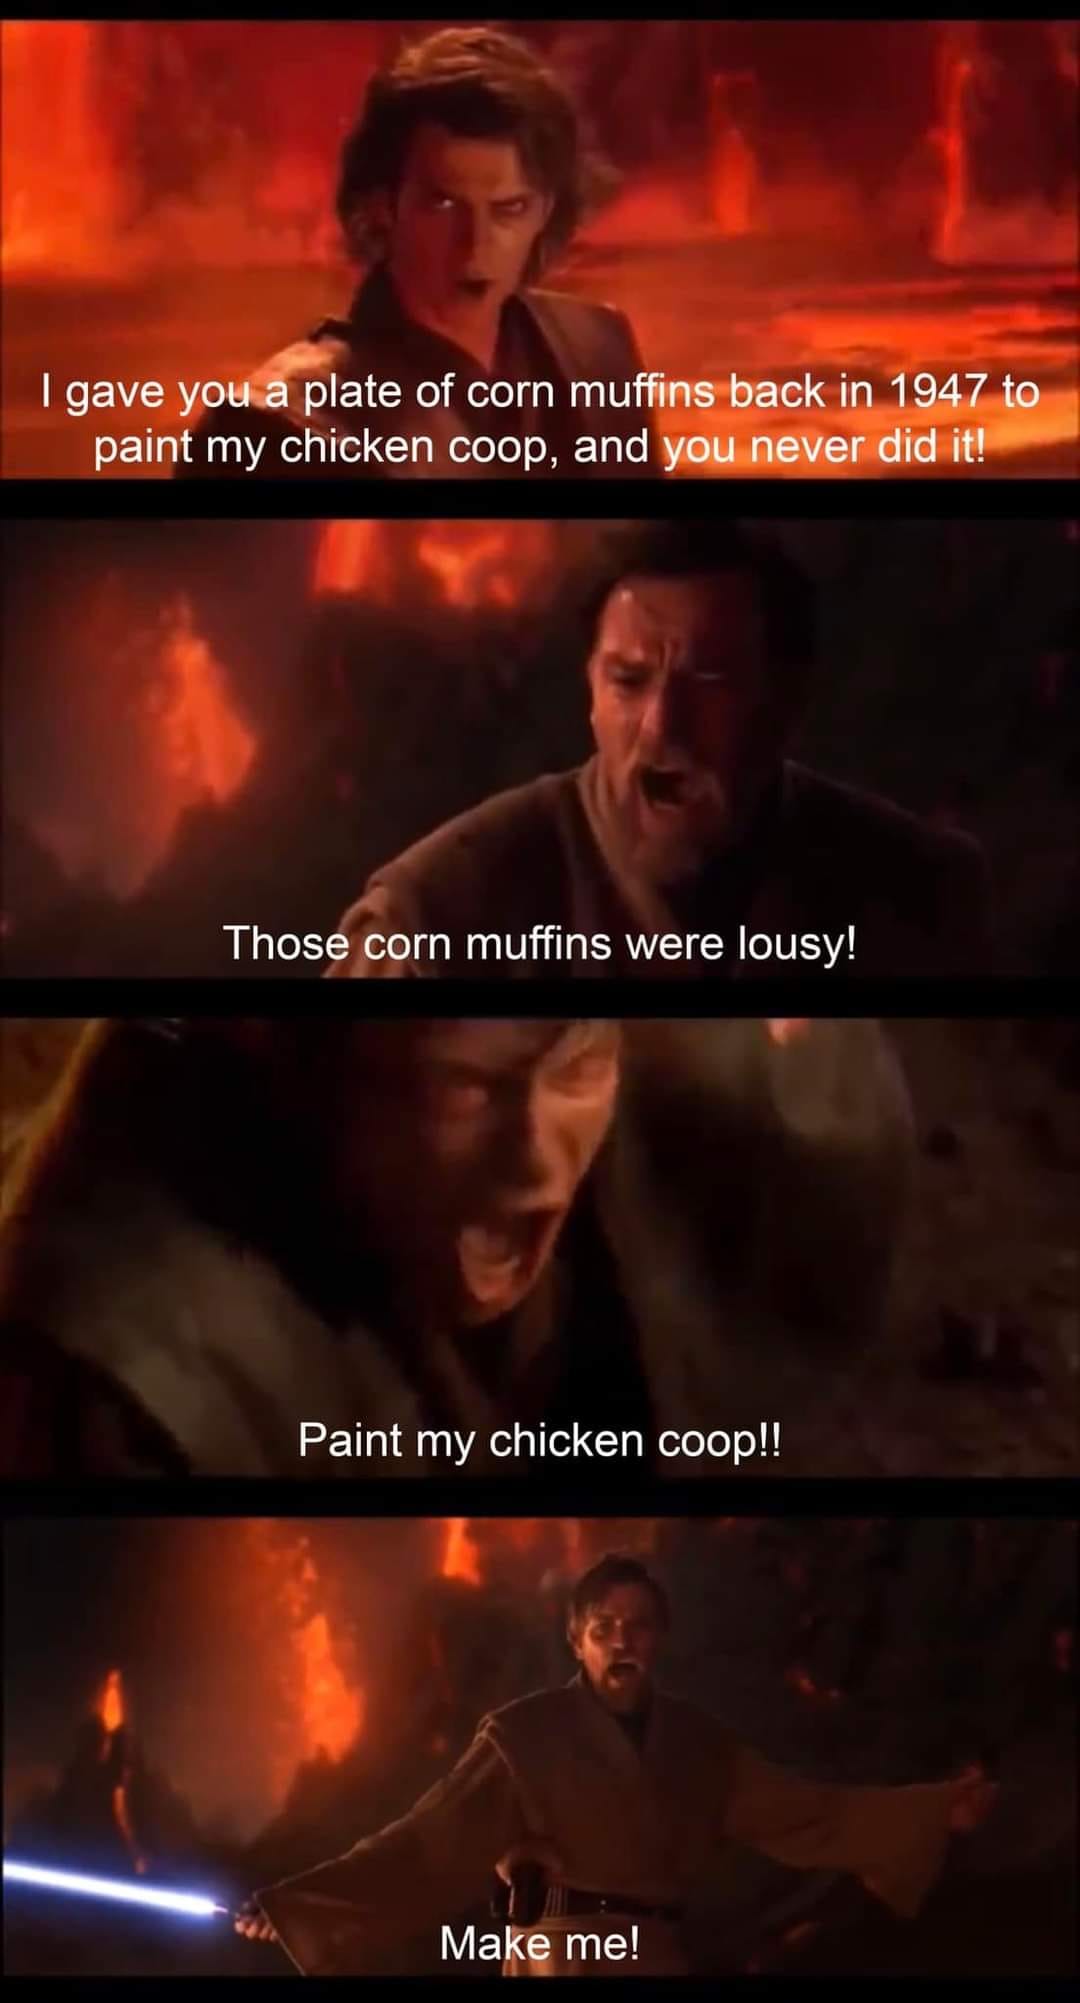 i gave you a plate for corn muffins back in 1947 to paint my chicken coop, and you never did it, those corn muffins were lousy, paint my chicken coop, make me, star wars meme